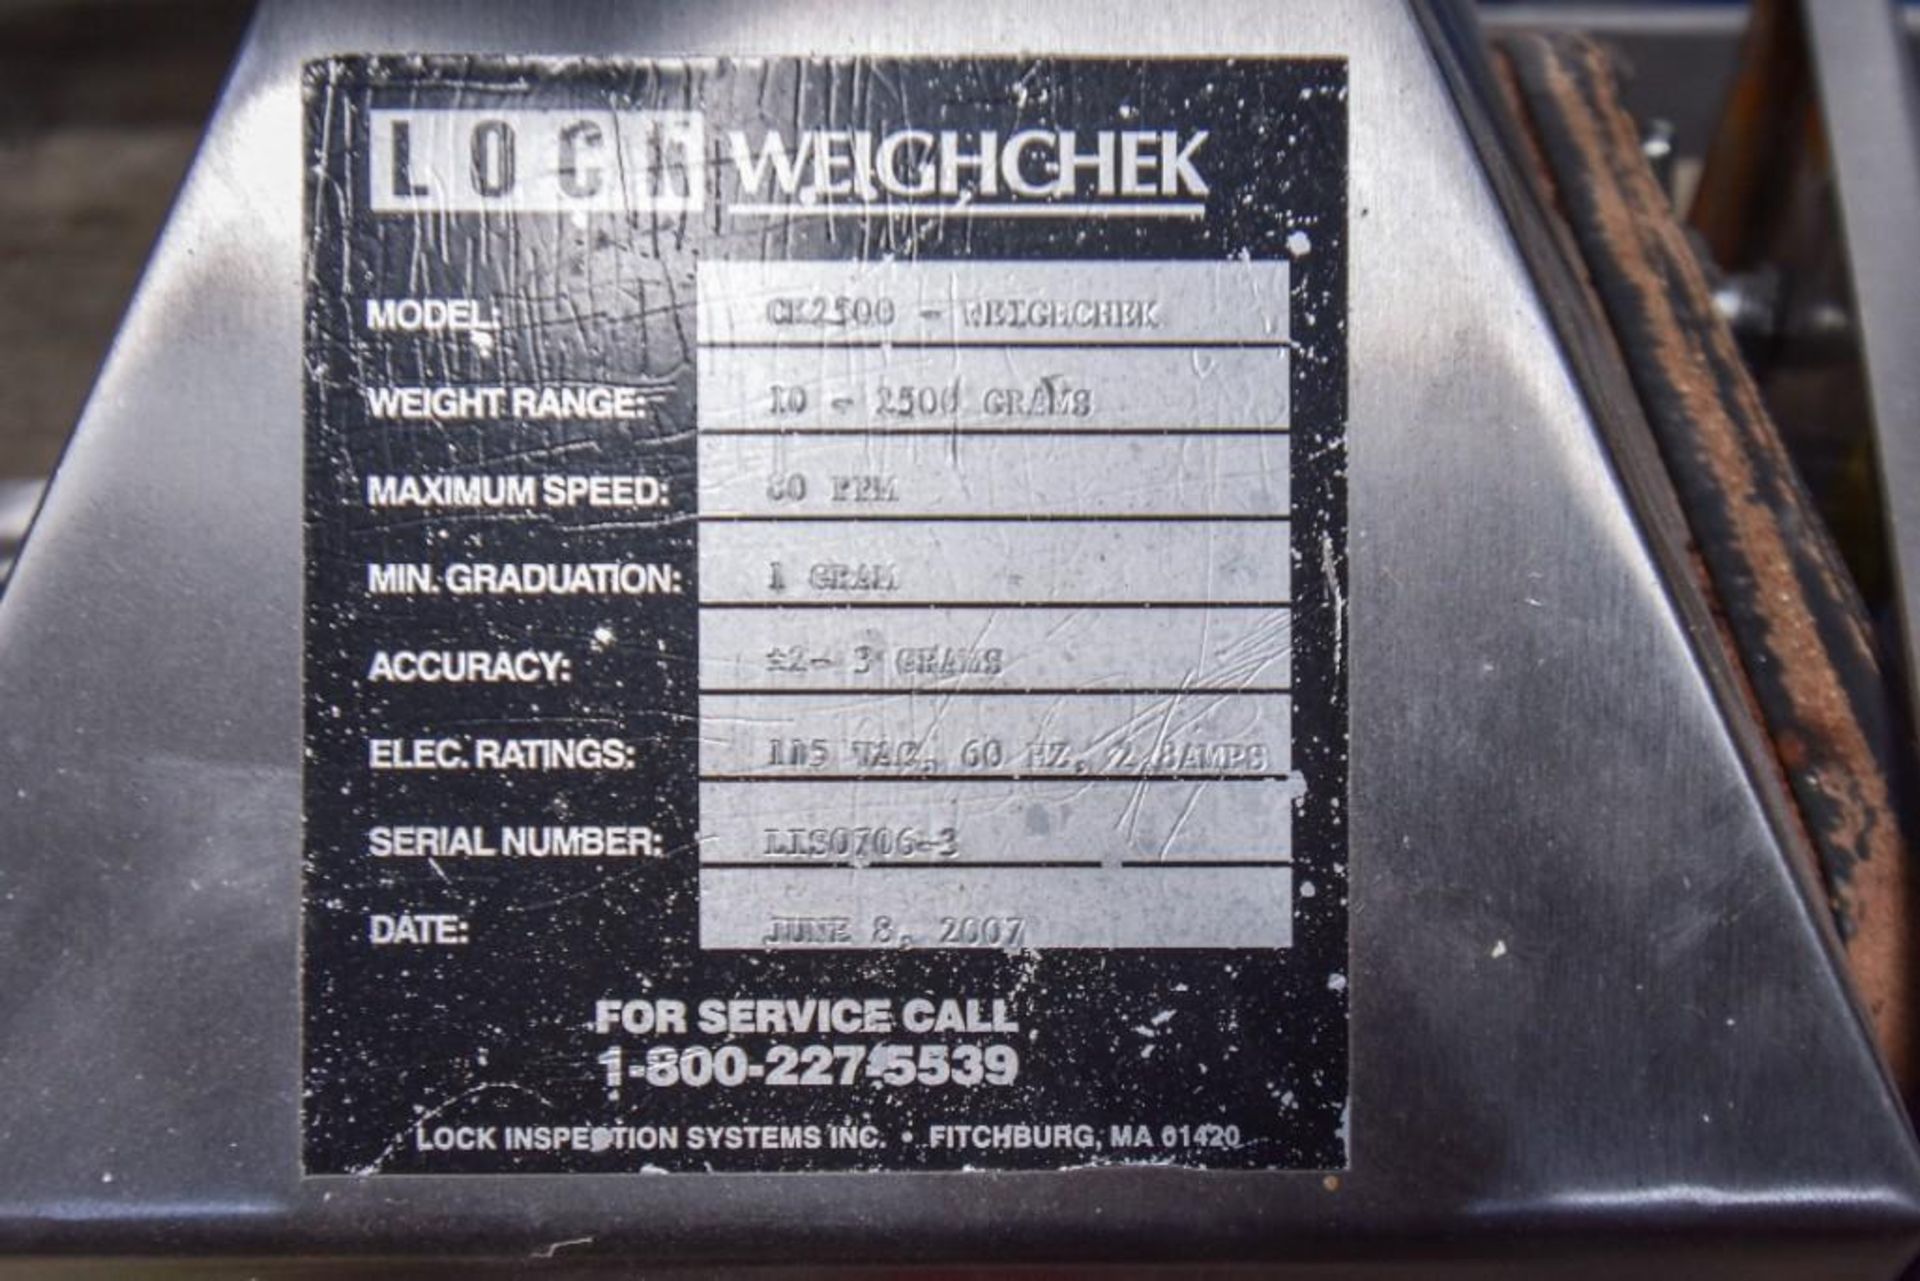 Lock Inspection Systems WeighChek CK2500 Checkweigher - Image 7 of 7